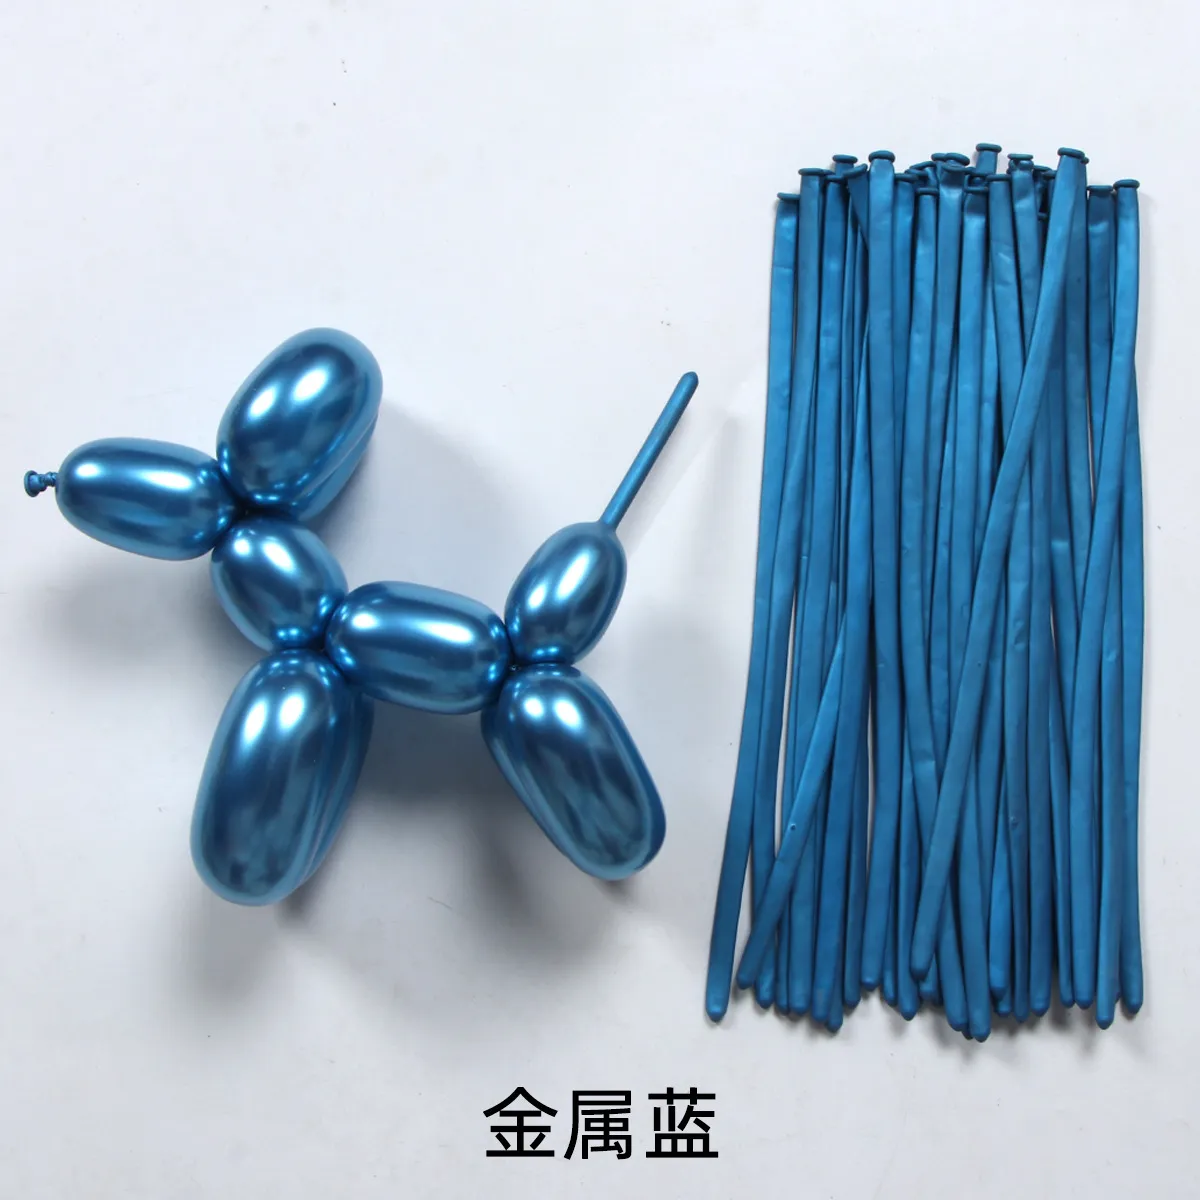 Party Decoration Metallic Latex 260Q Balloon Sticks For Twisting Animals  Flowers To Decor Birthday Wedding Engagement Anniversary Festival Picnic  Multicolor From Wuxiaojing, $30.61